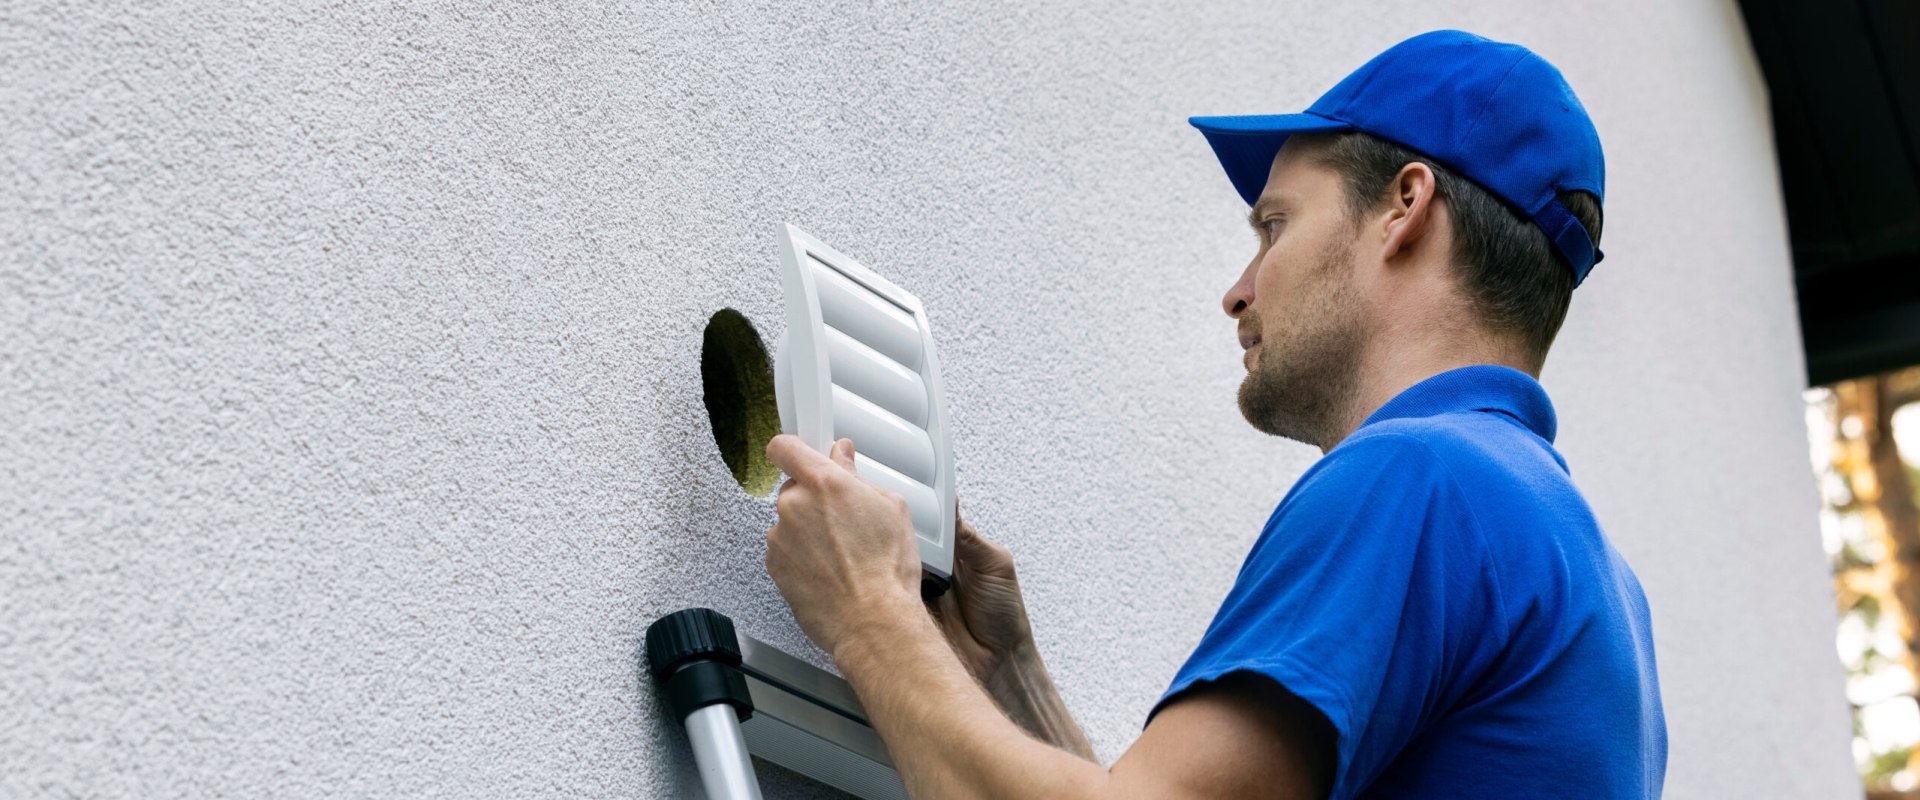 How to Choose the Right Dryer Vent Cleaning Company